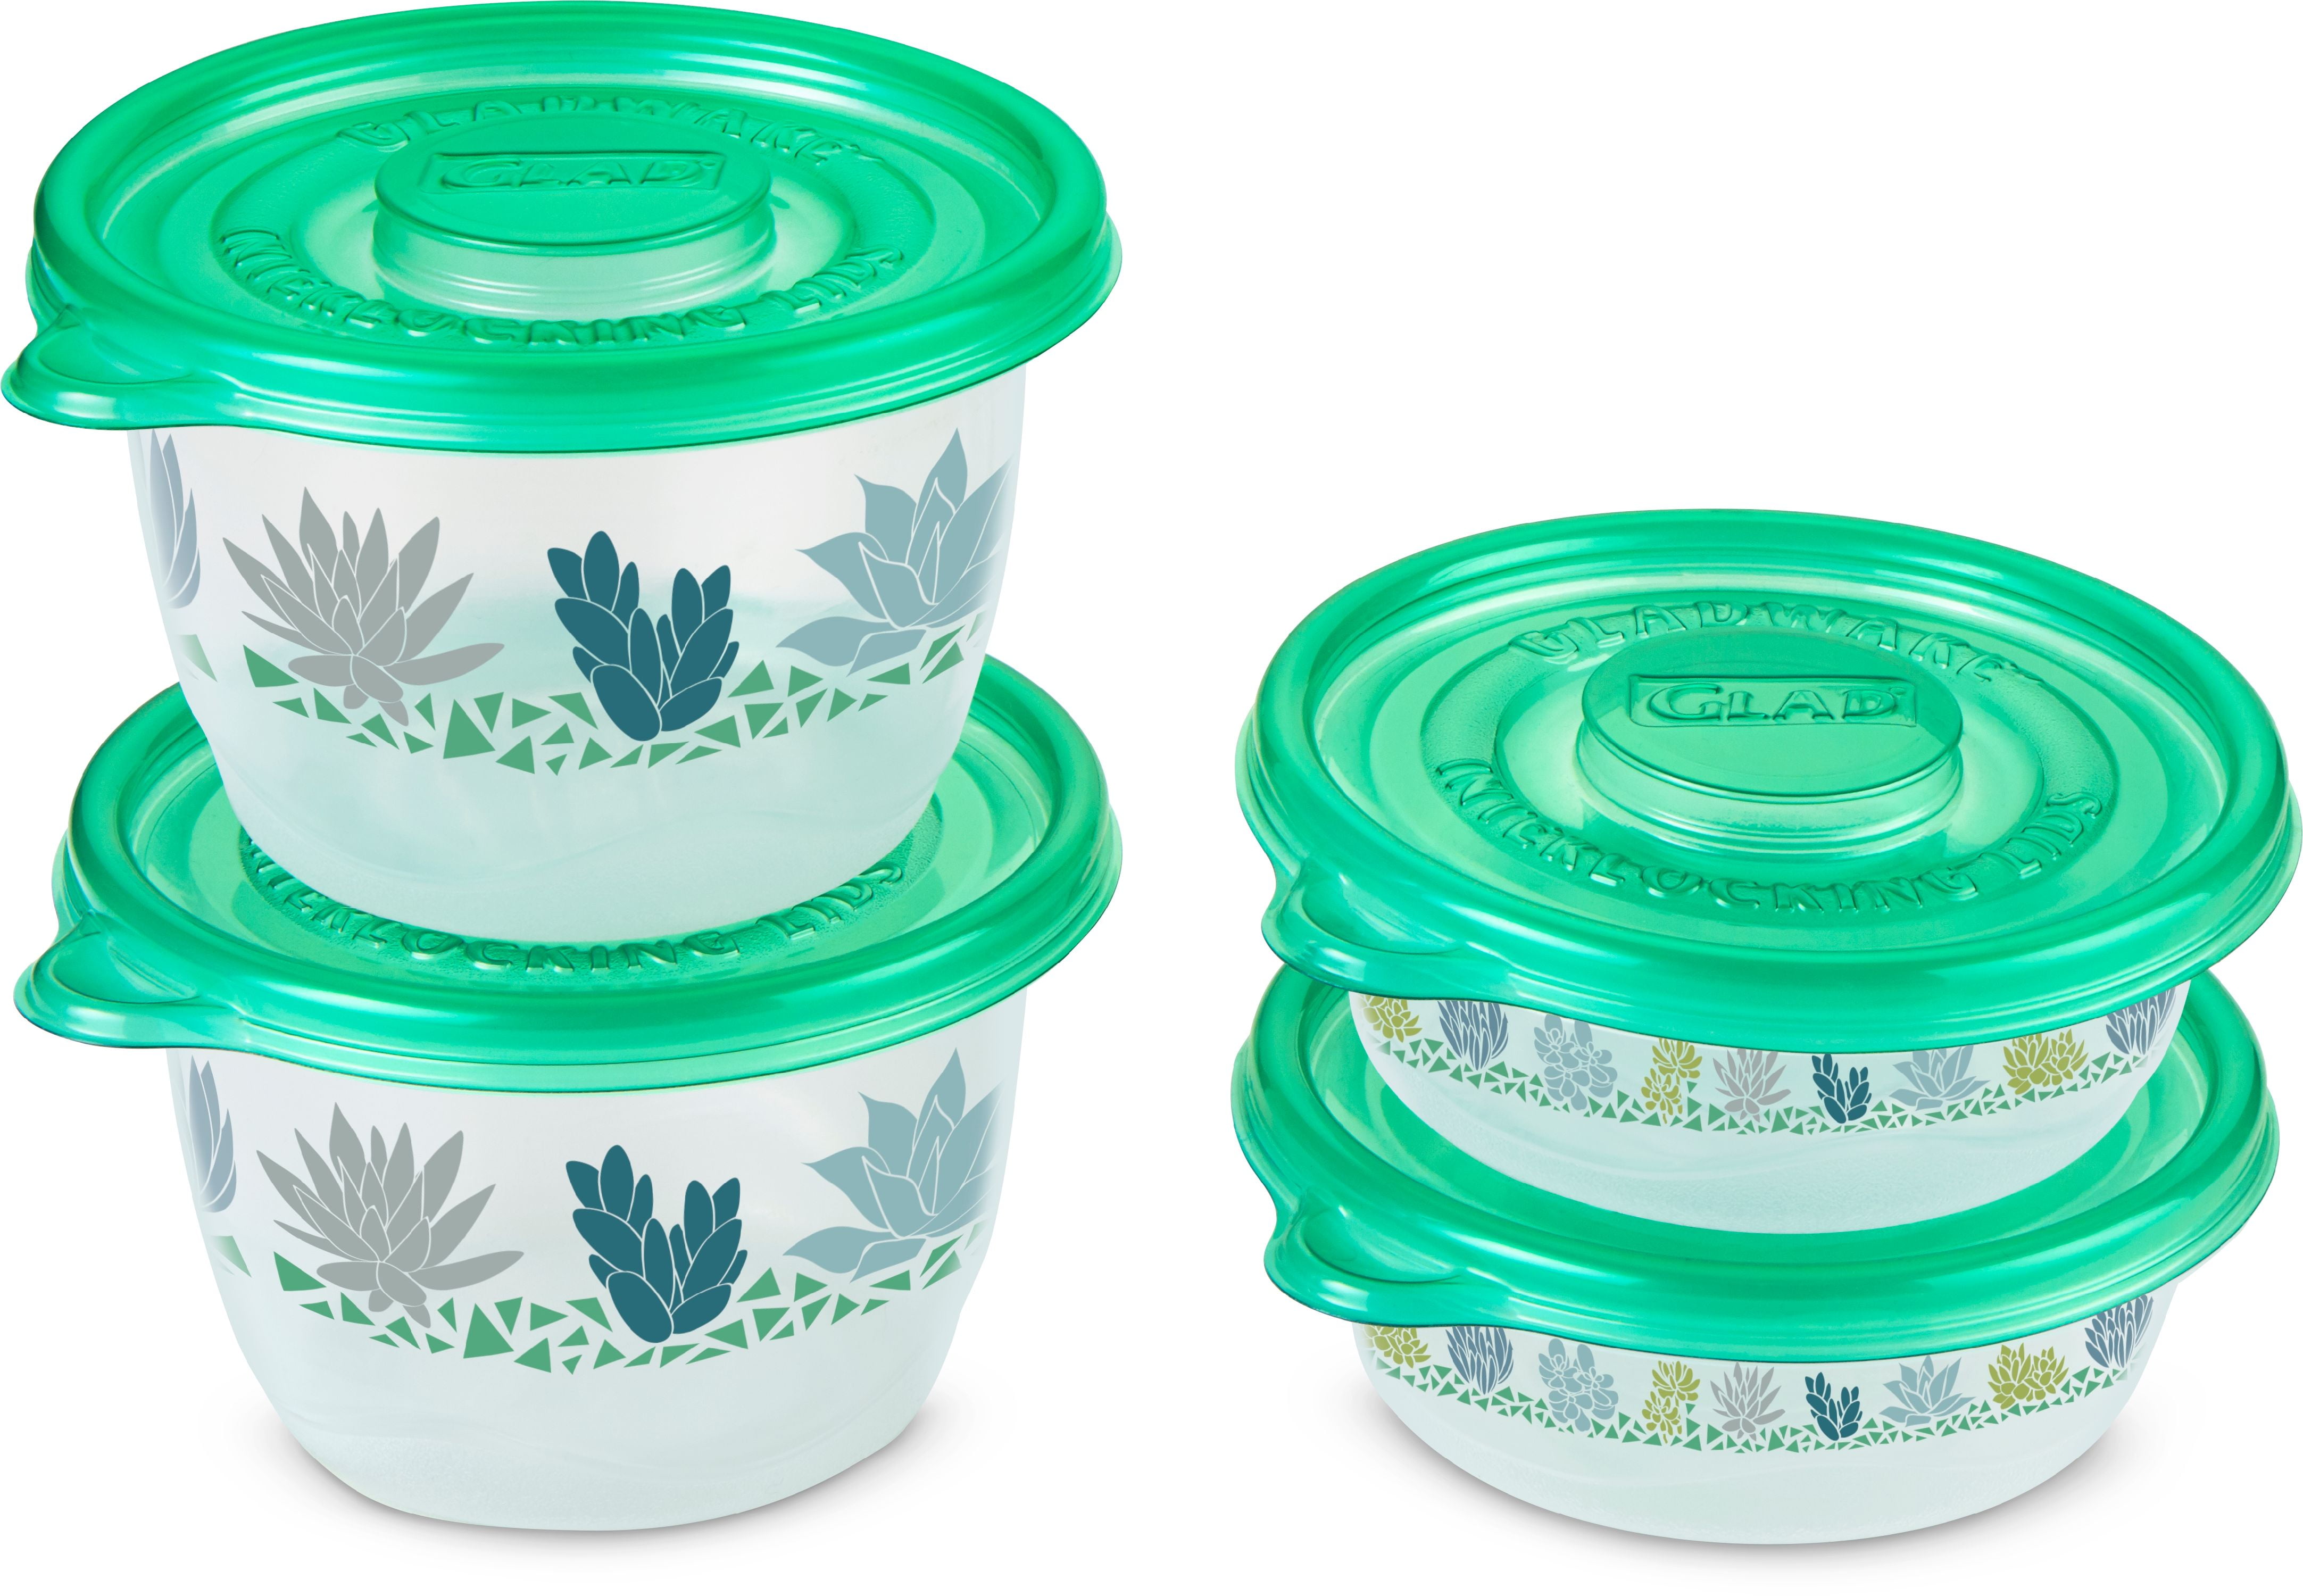 Glad Containers & Lids 2 Ea, Plastic Containers